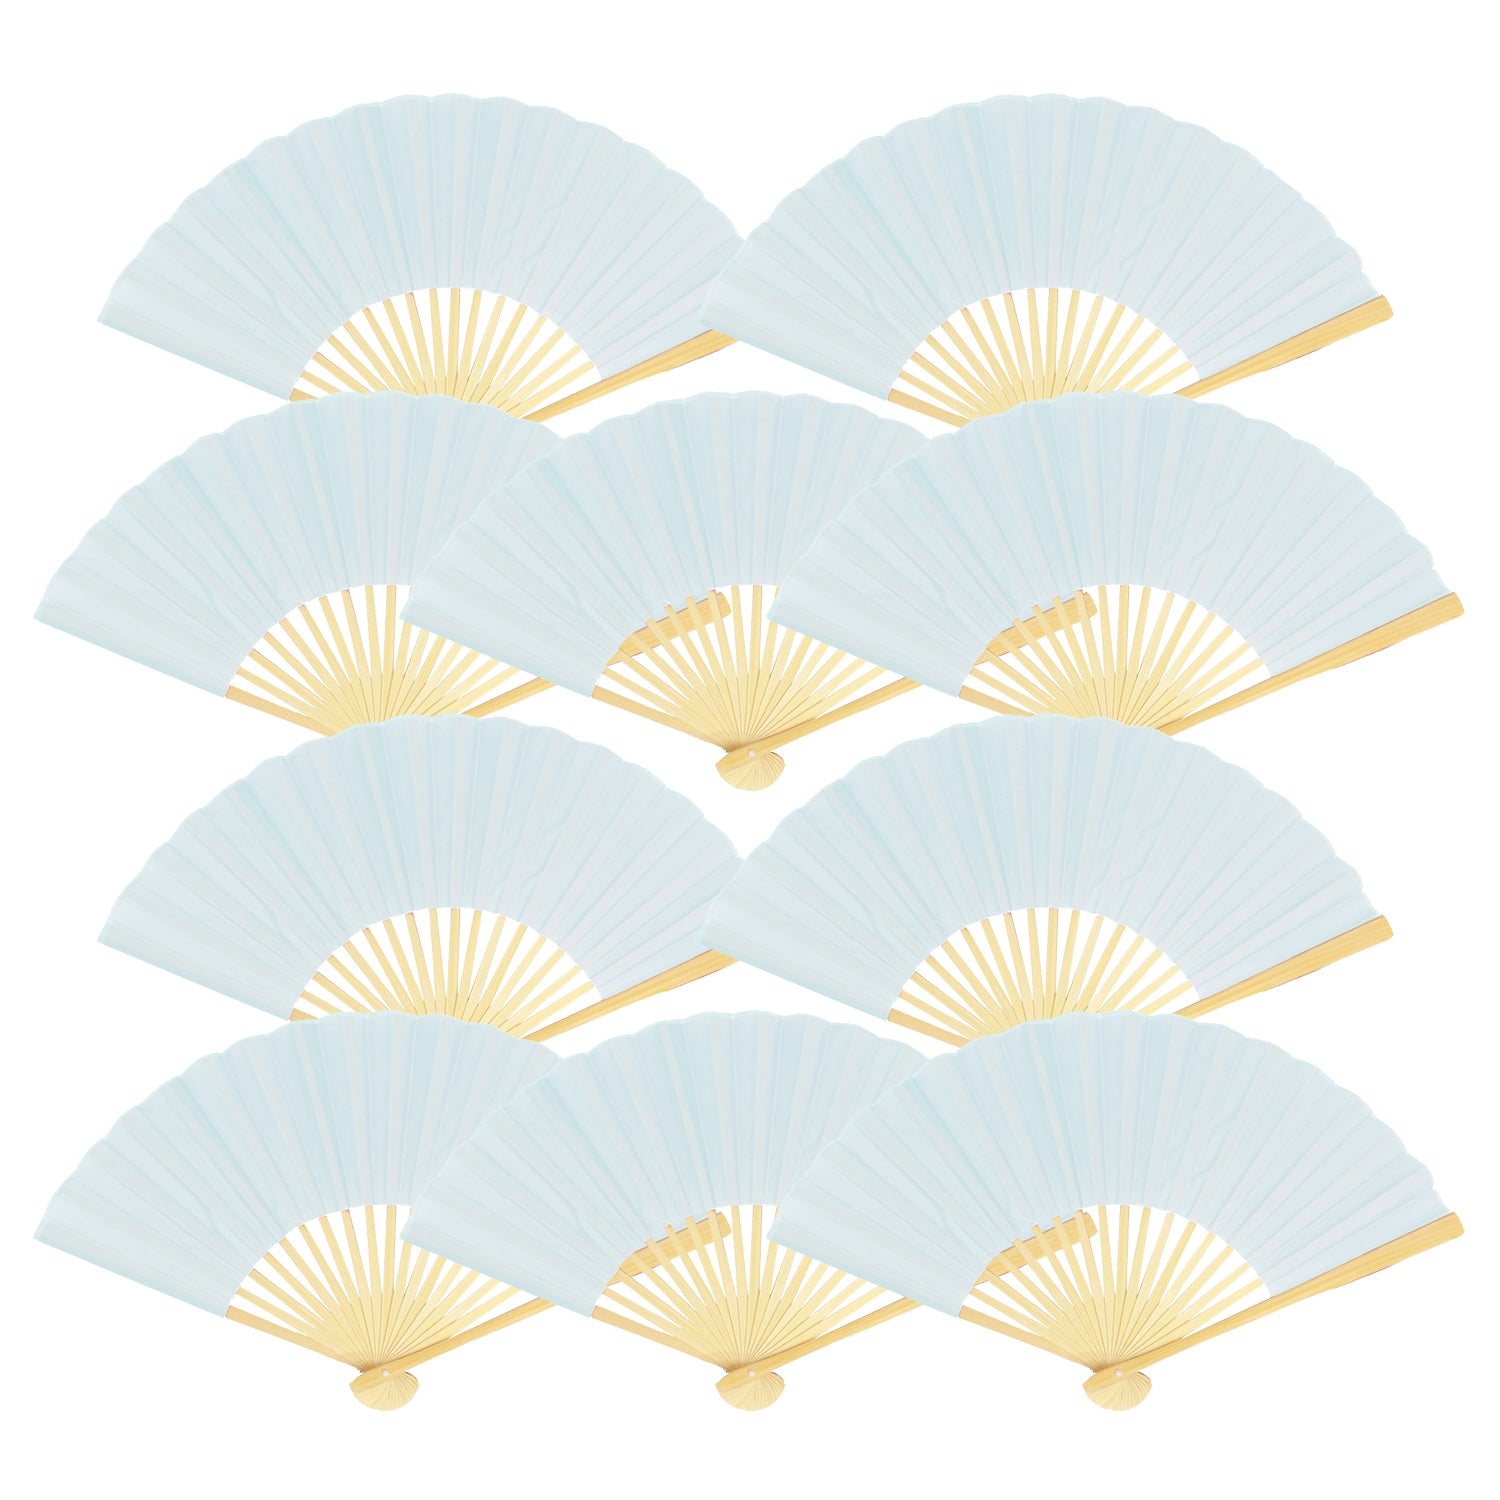 9" Arctic Spa Blue Silk Hand Fans for Weddings (10 Pack)